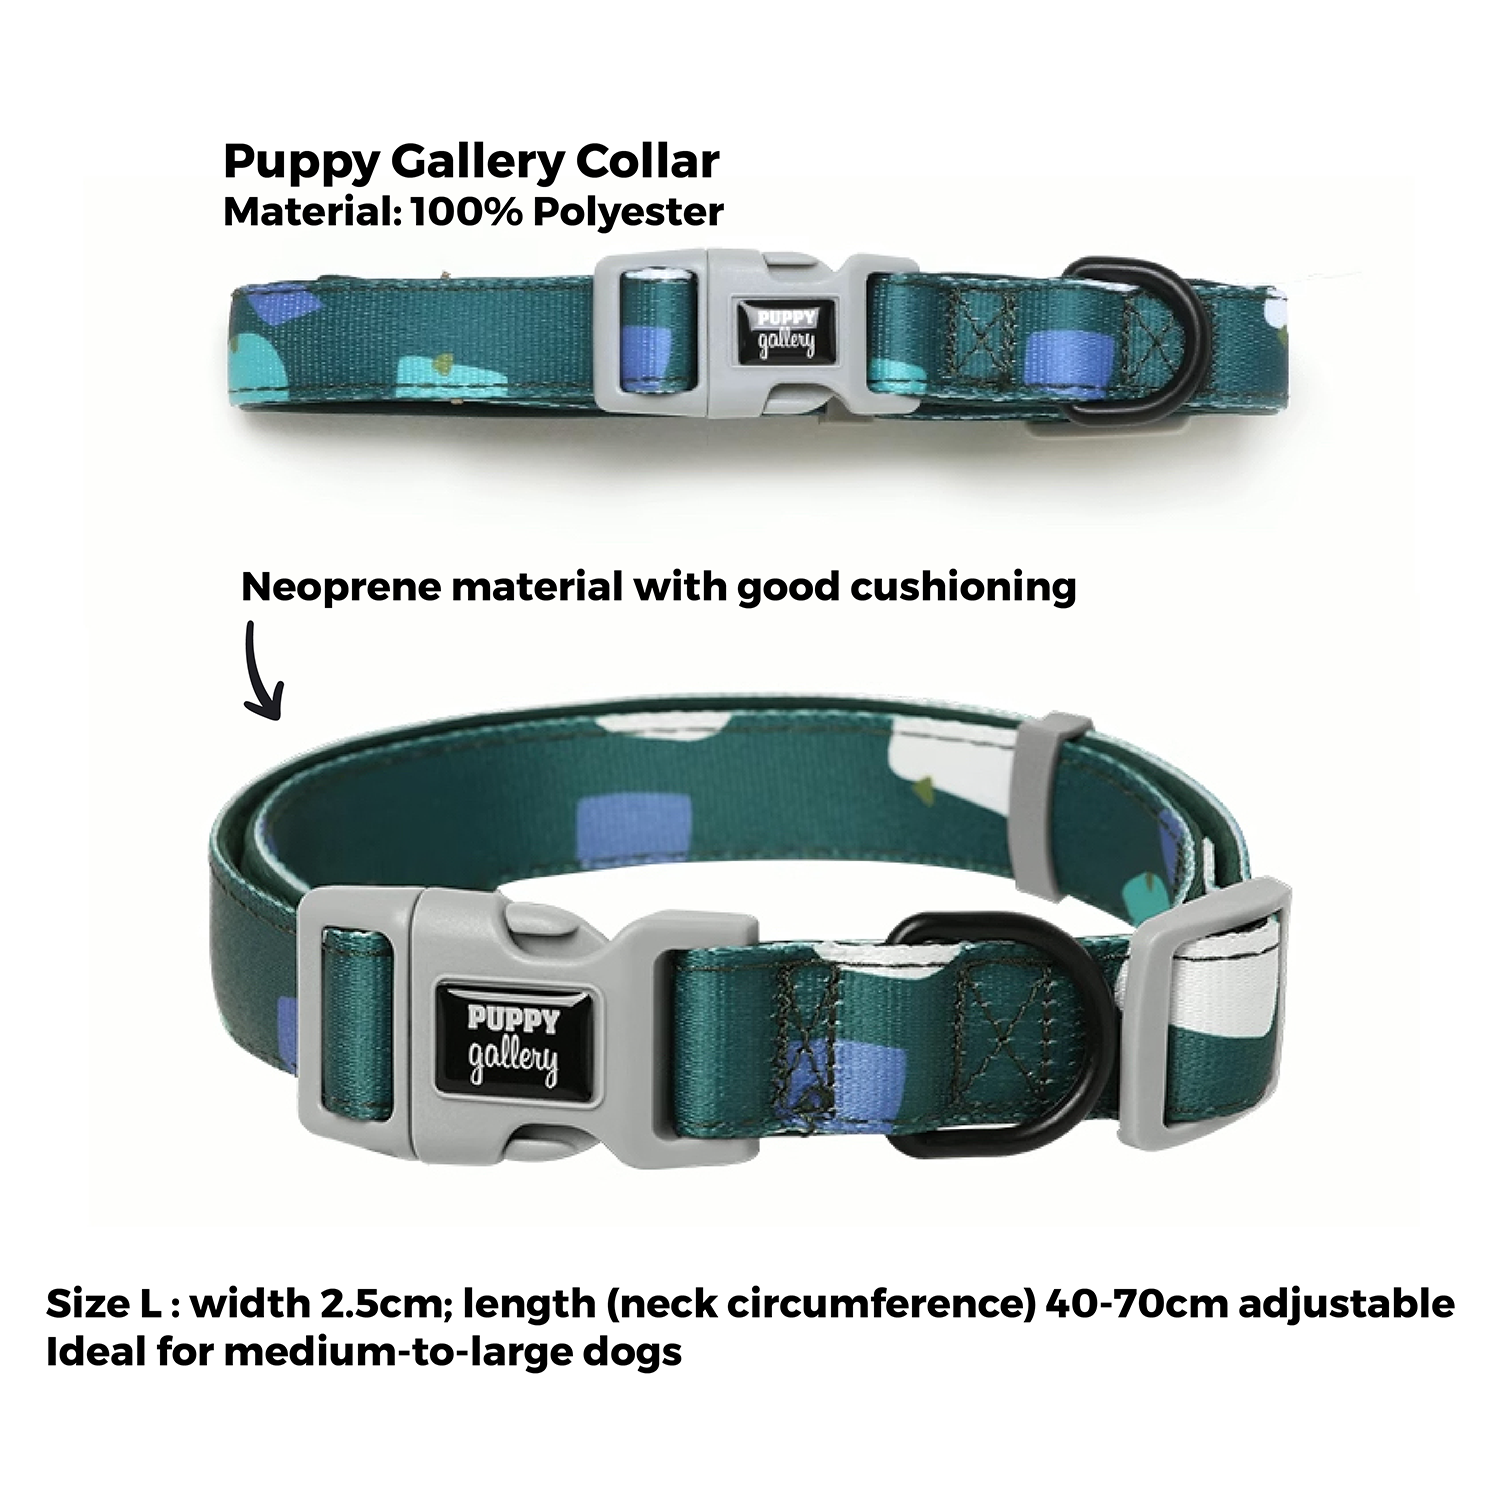 Puppy Gallery Amber Collar and Bashtag set